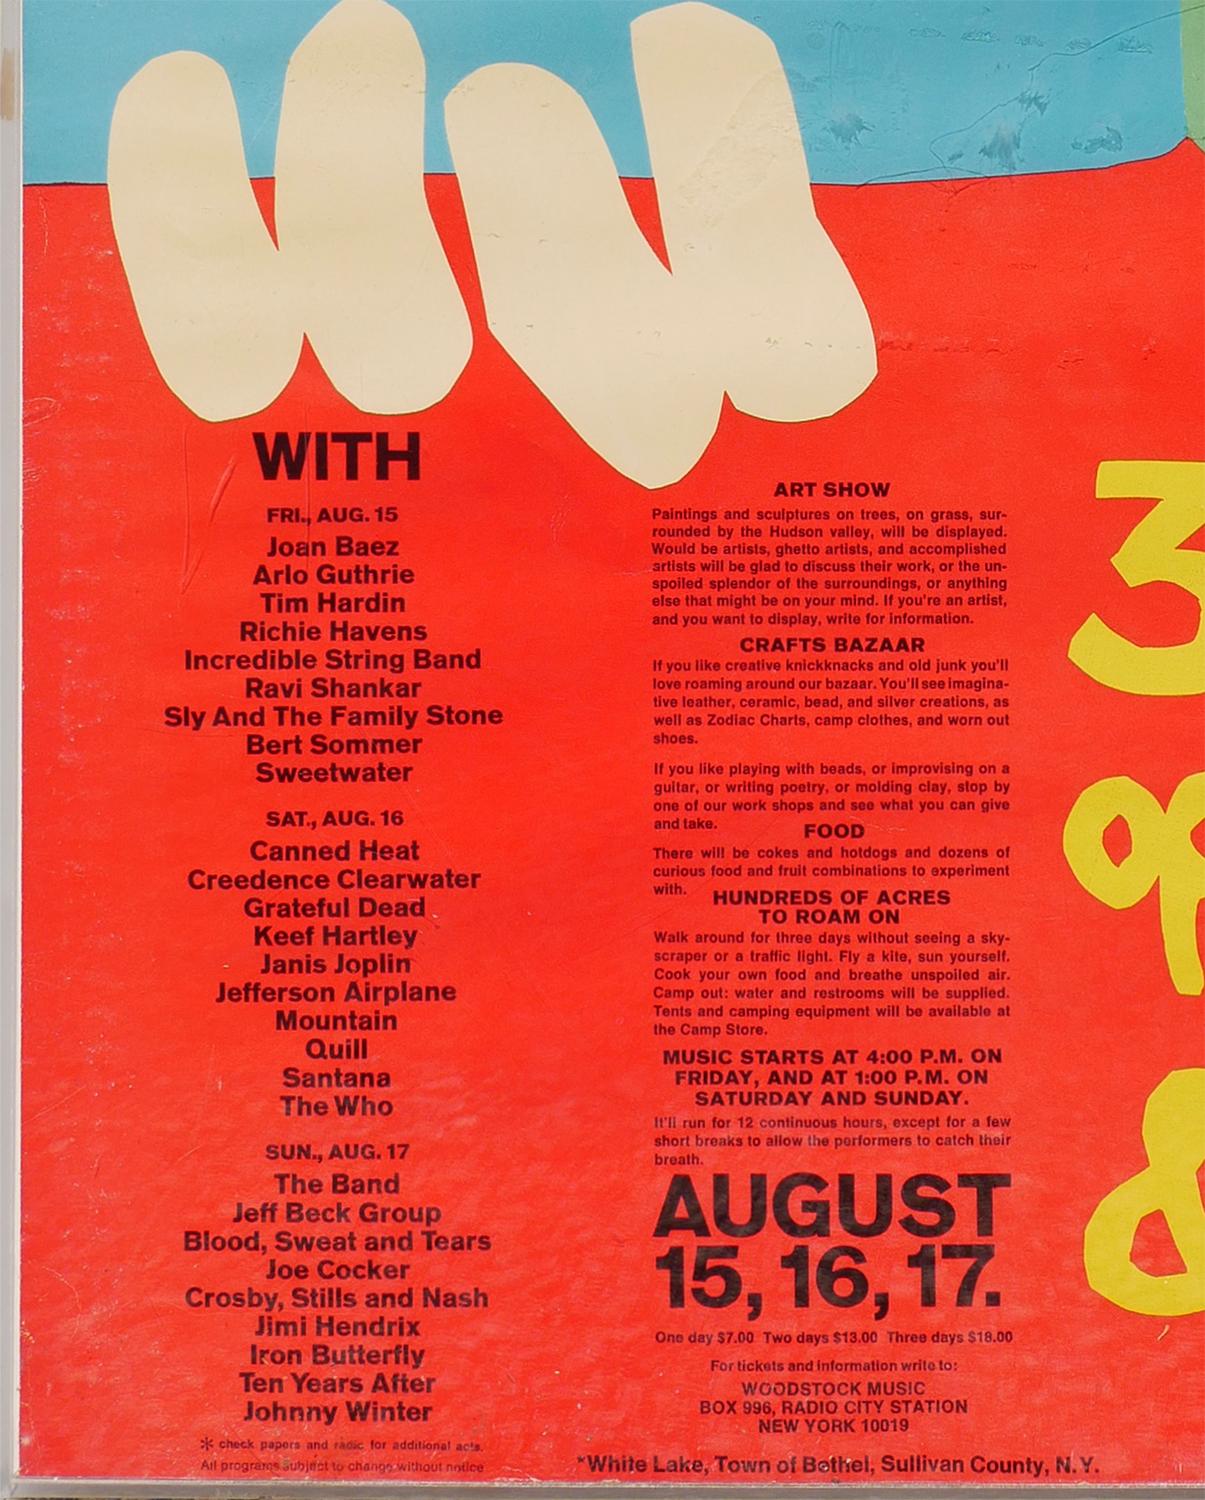 the woodstock poster featured a guitar and what animal